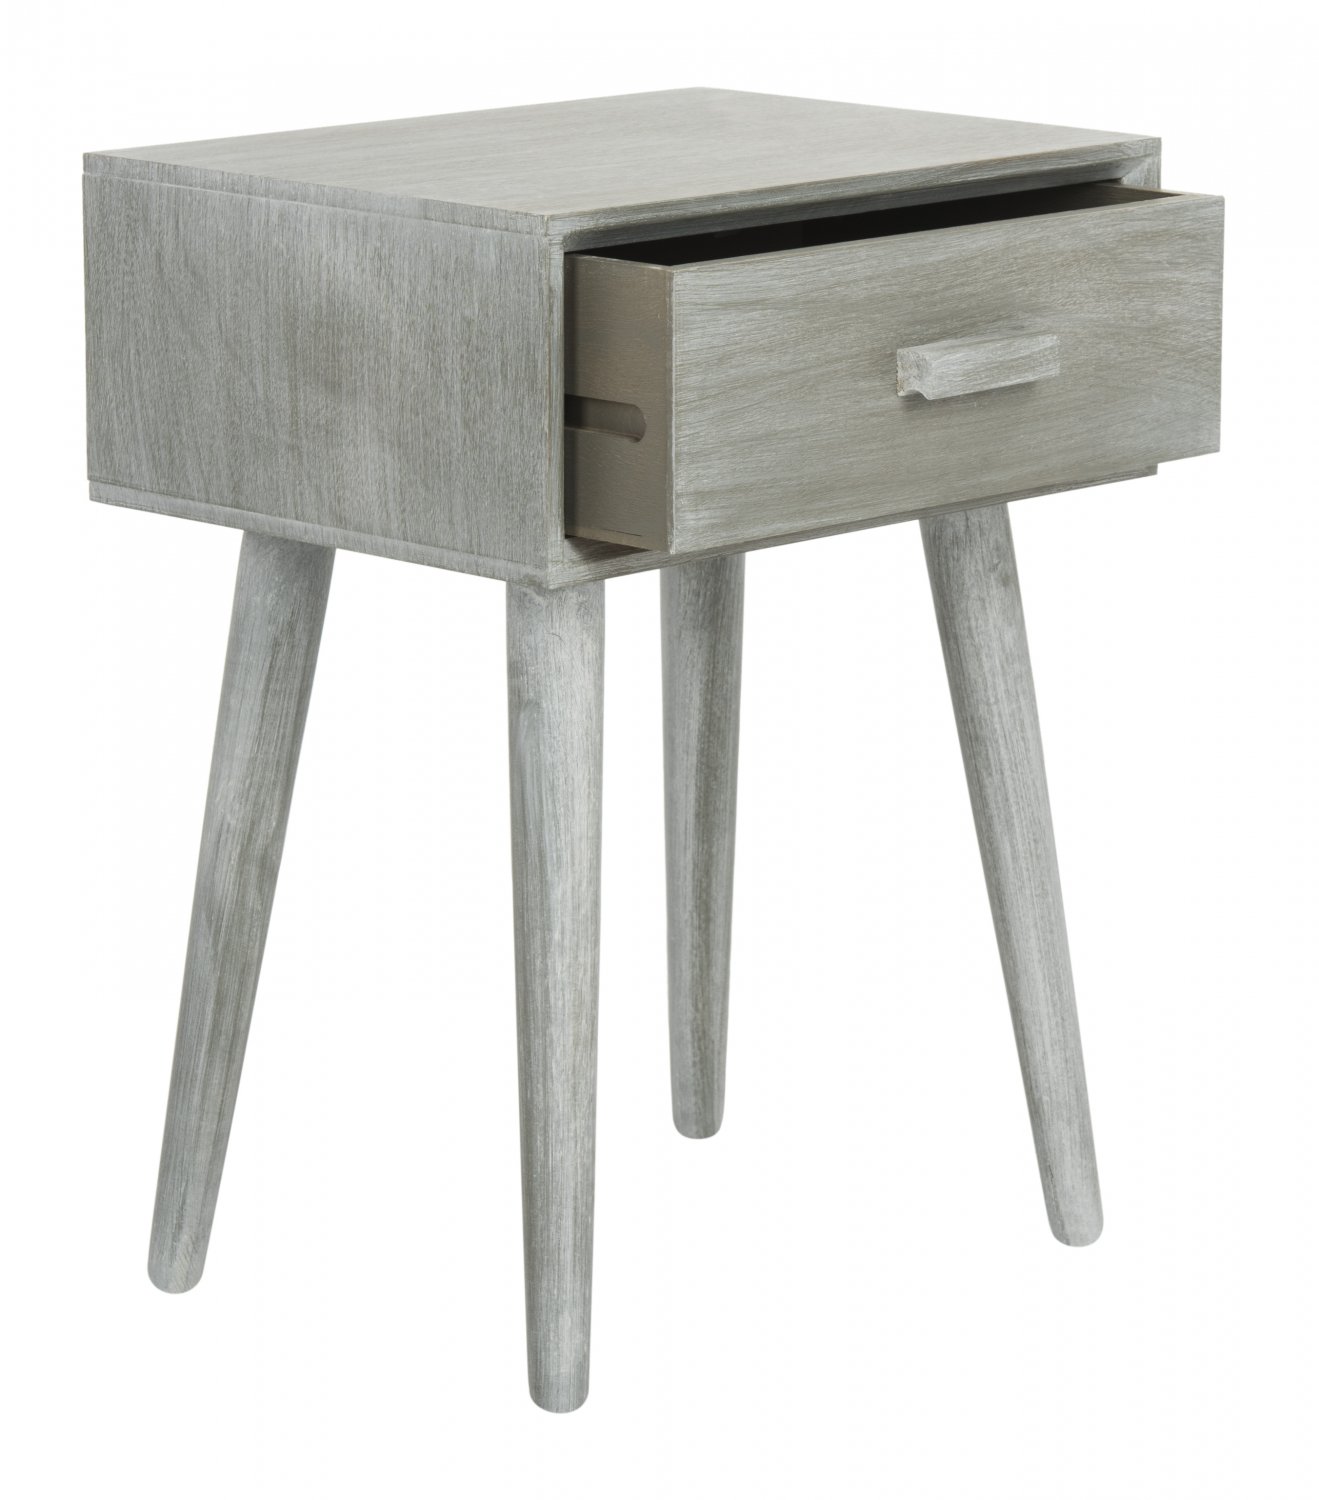 Safavieh Lyle 1 Drawer Casual Glam Accent Table